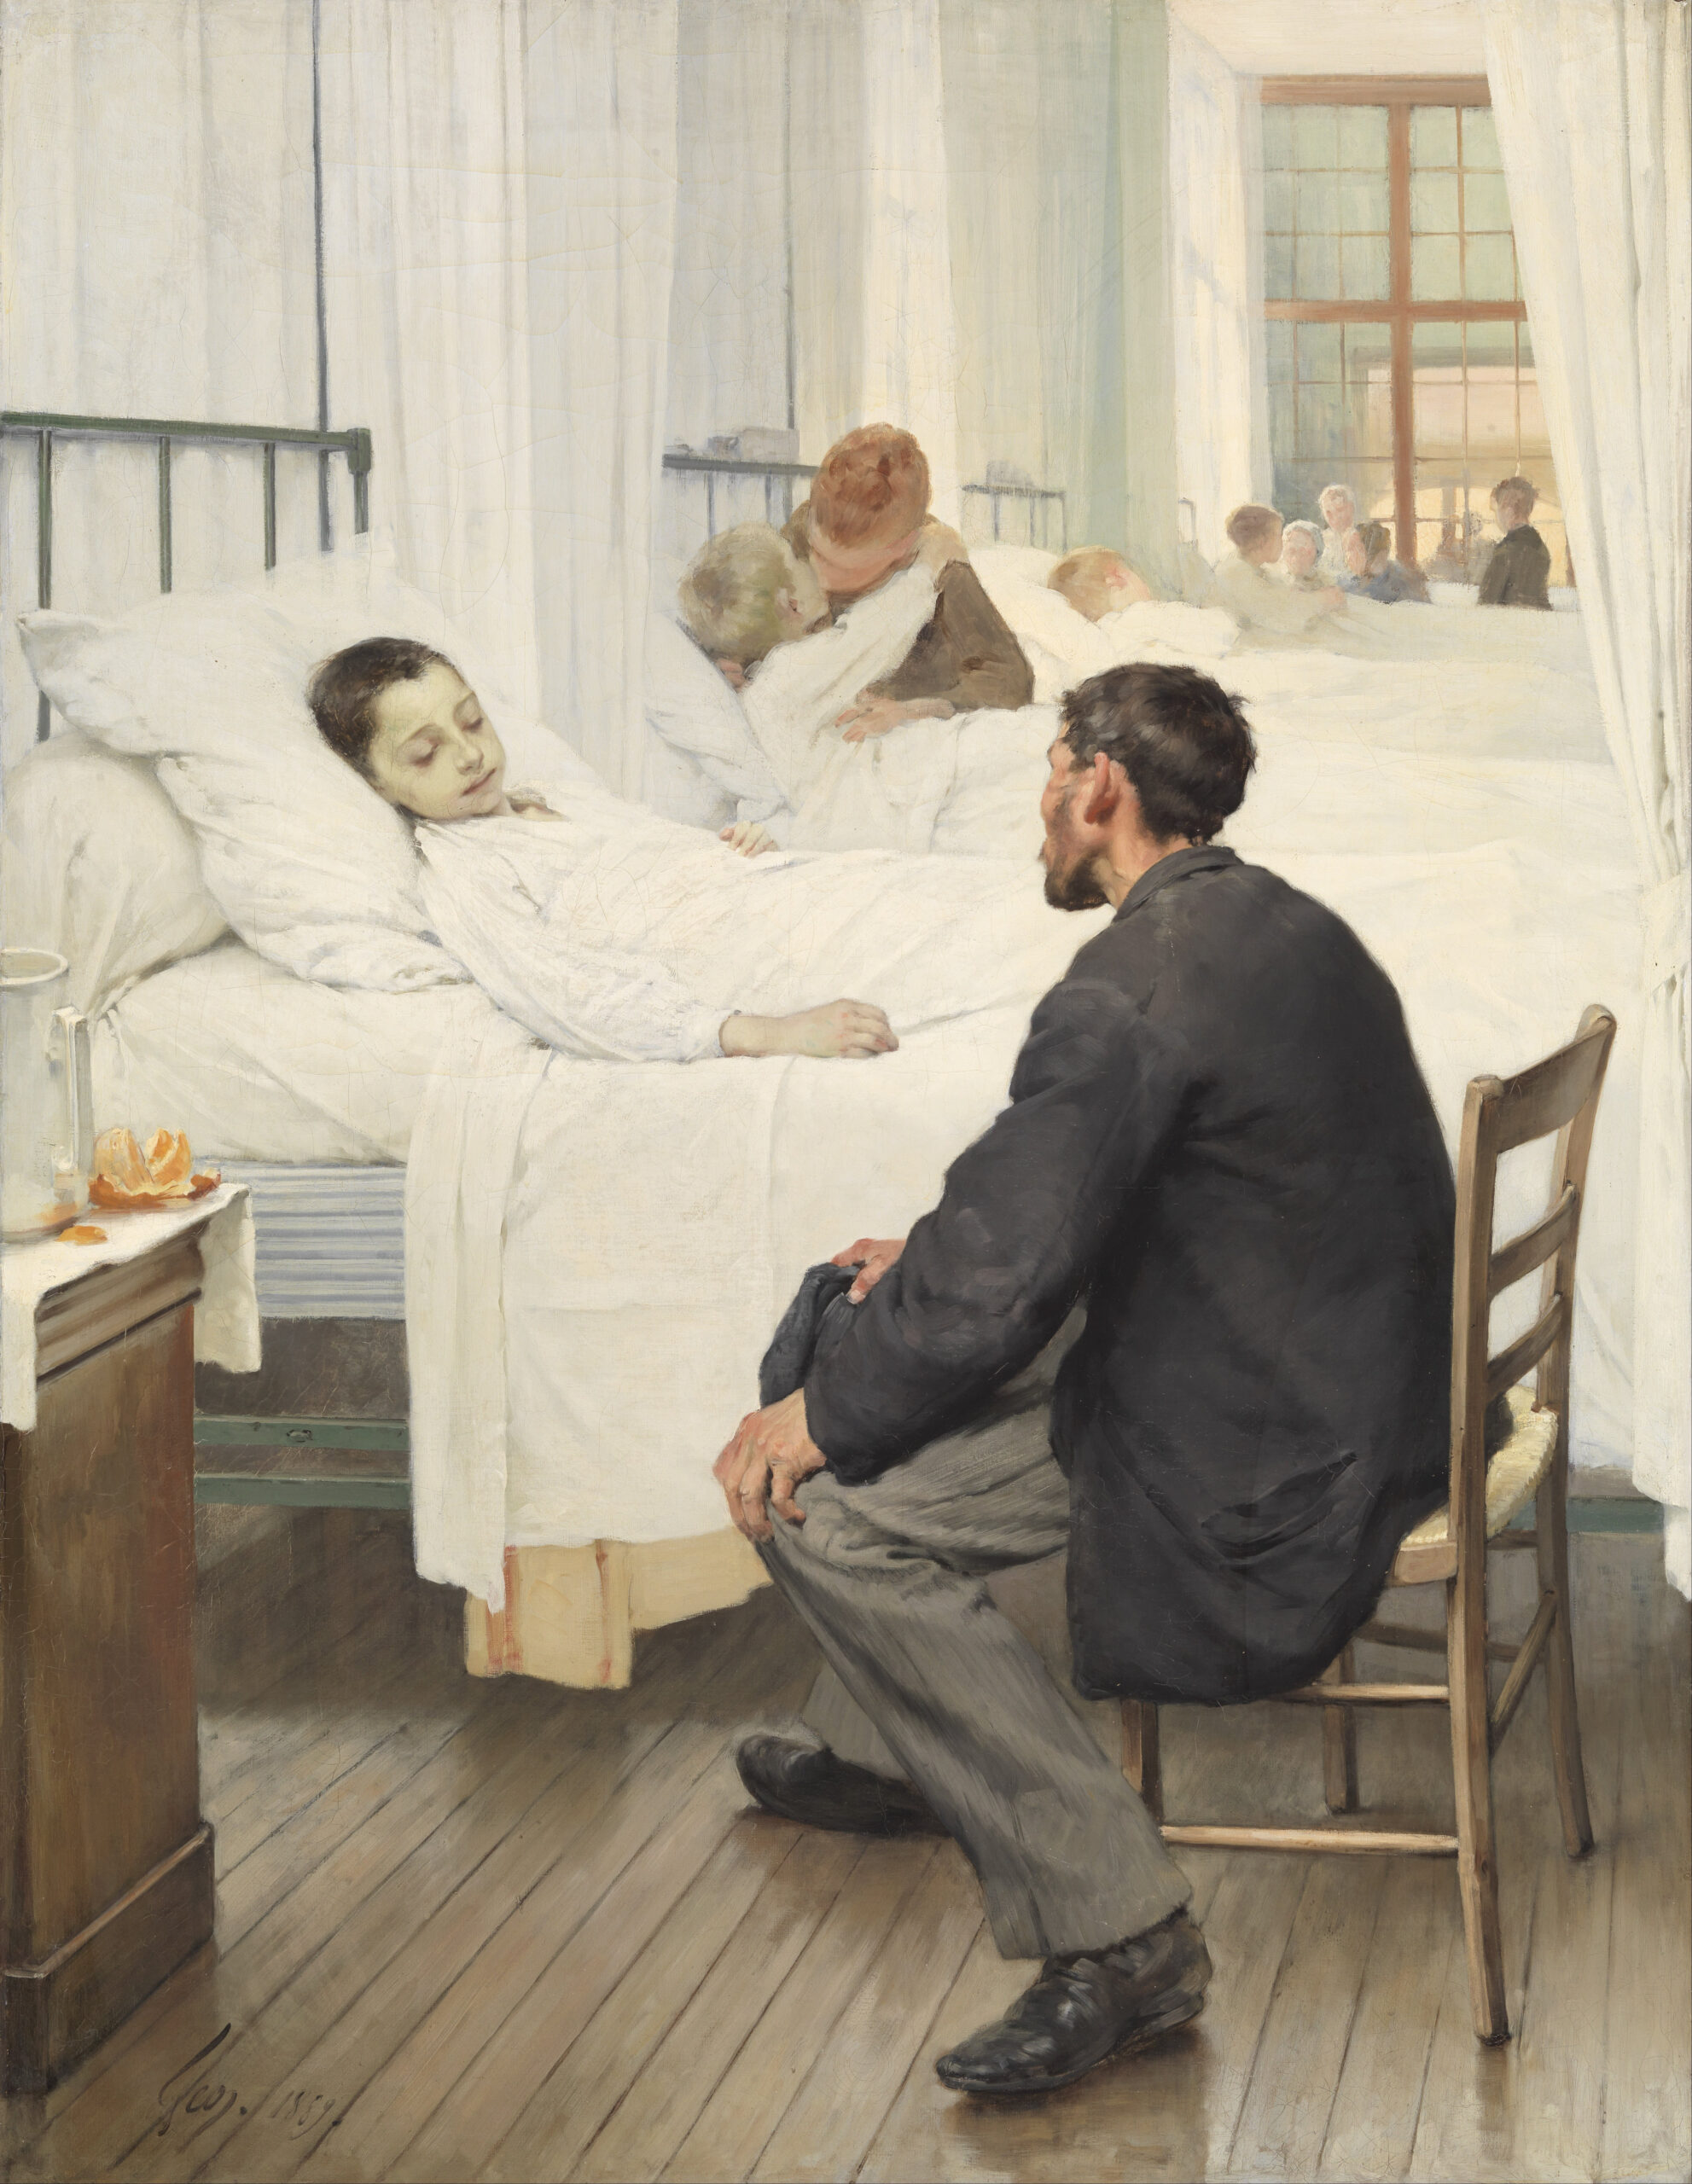 Visit Day at the Hospital by Jean Geoffroy (1889)